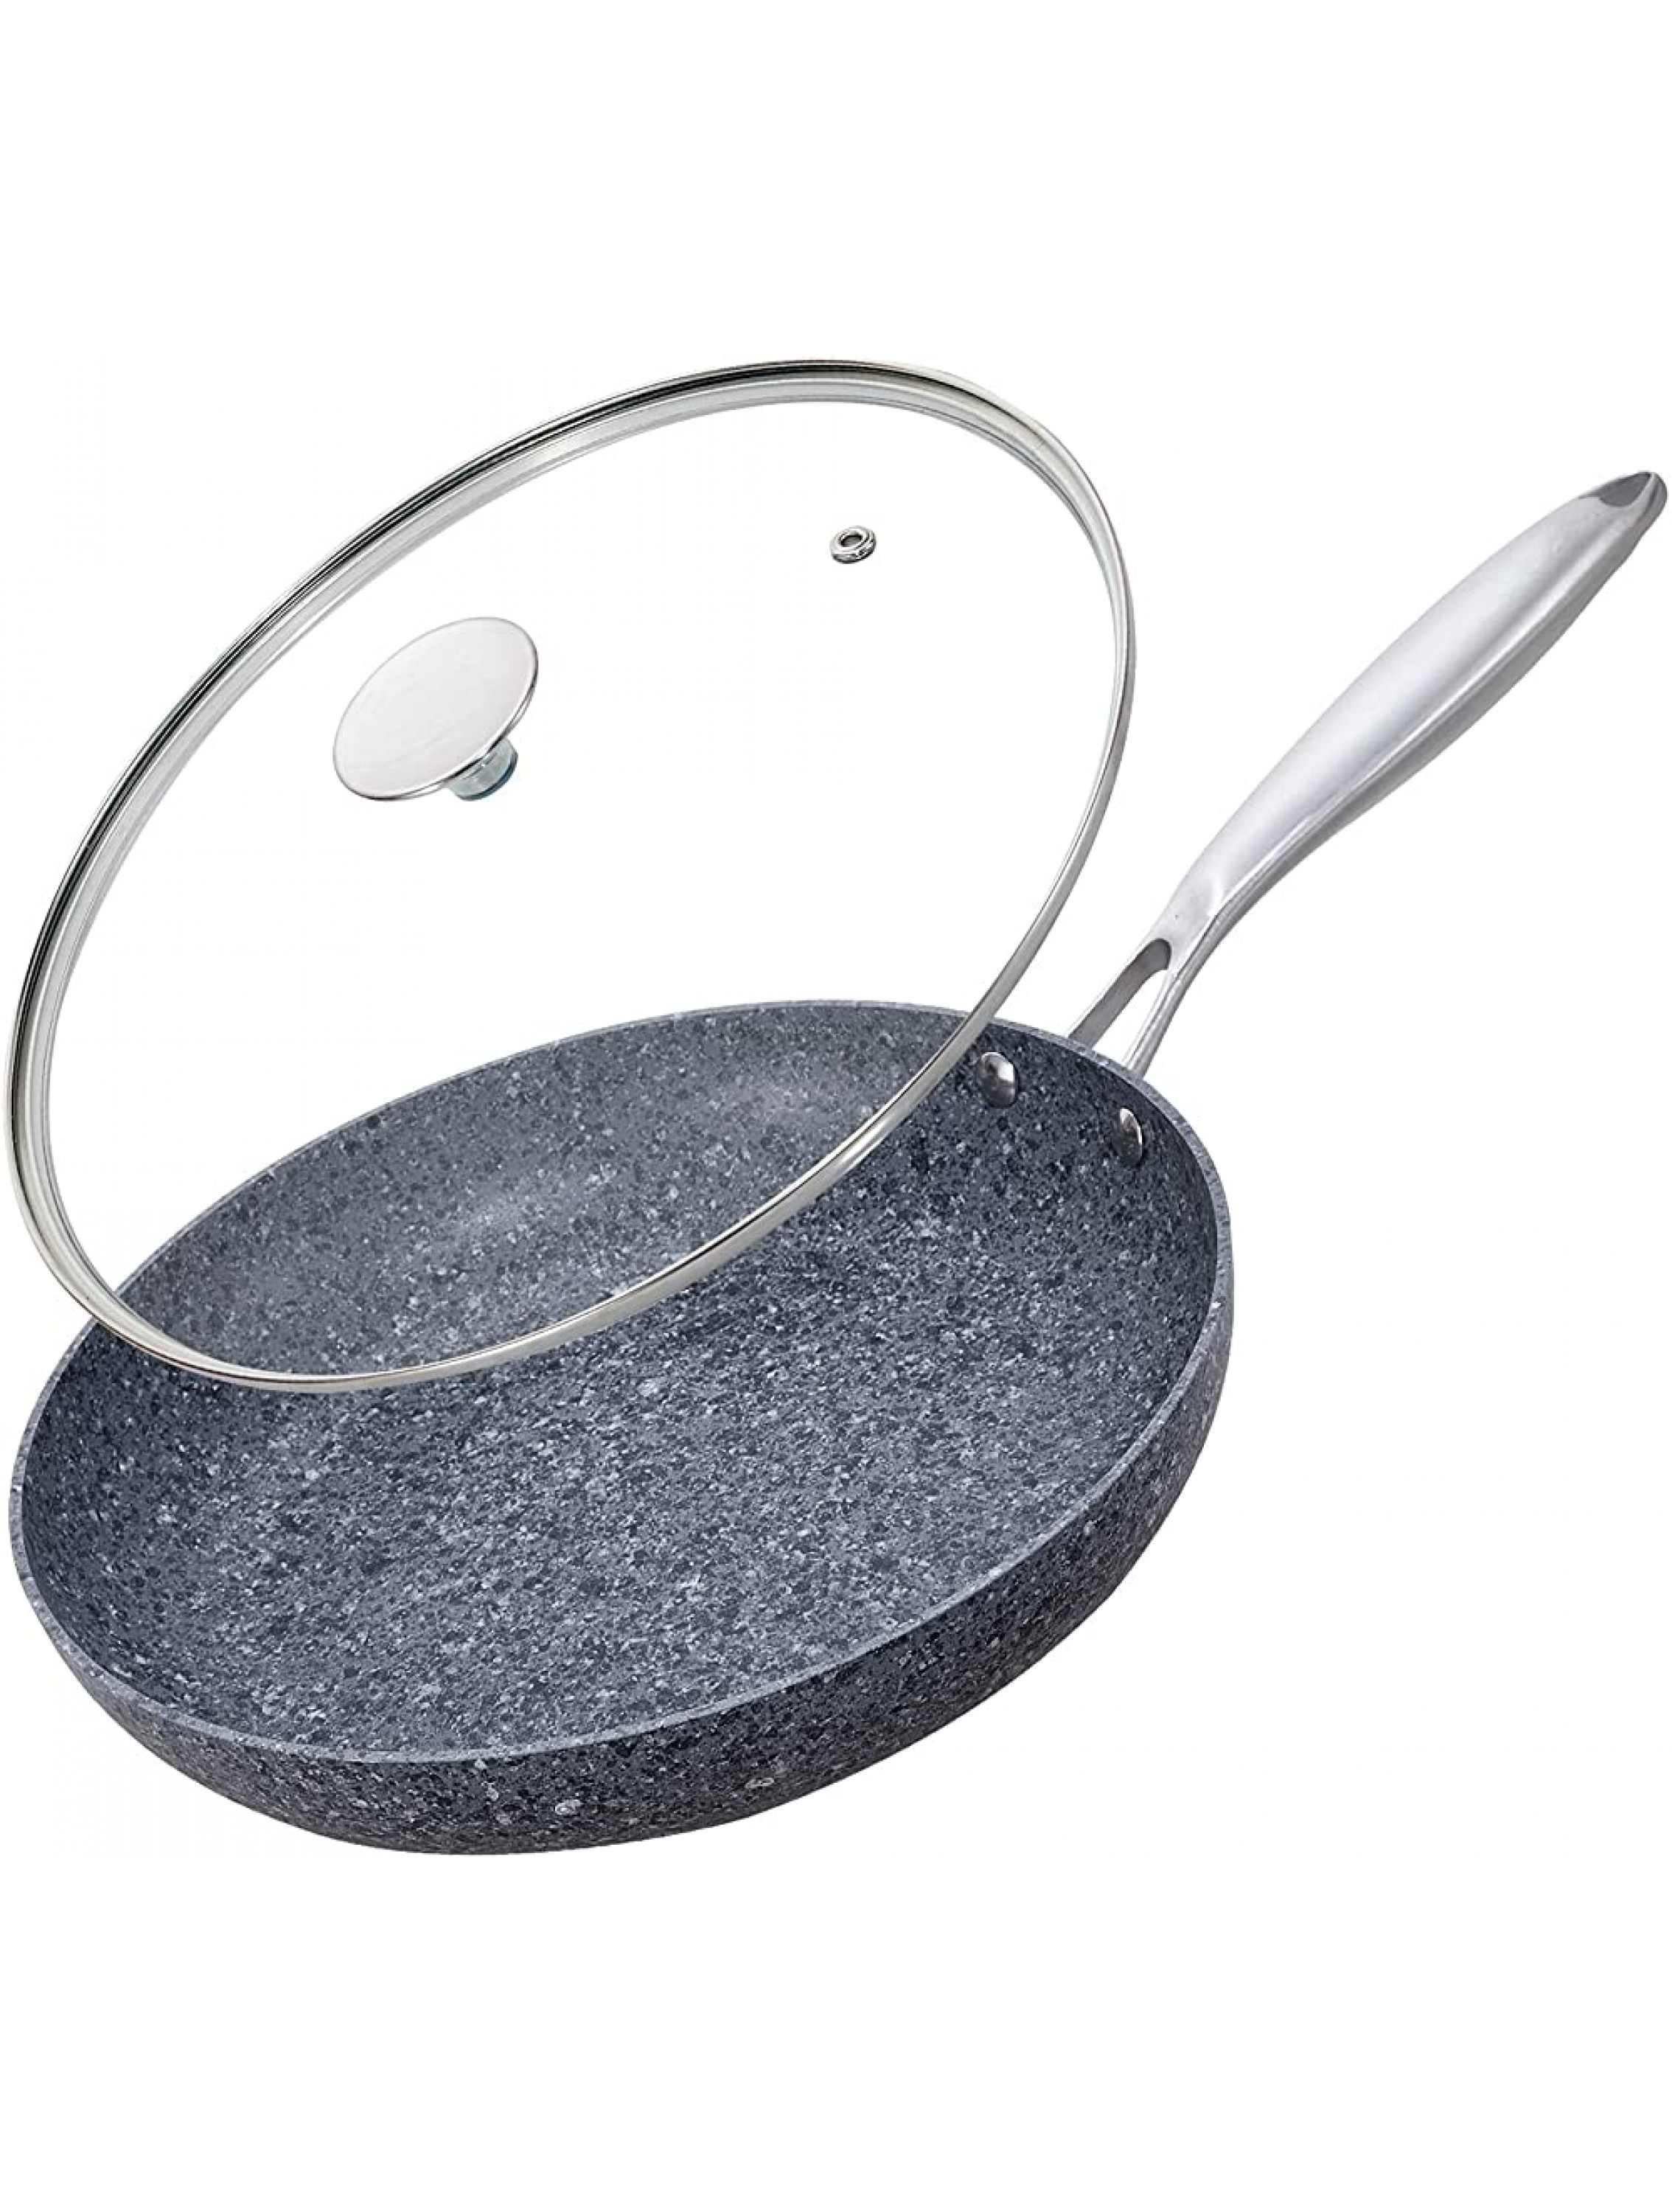 Leekerry Nonstick Skillet Frying Pan With Glass Lid-Granite Non Toxic Stone,Derived Ultra Nonstick CoatingFor Cooking Healthy Stone Cookware Chef's Pan 100% PFOA & APEO Free 11 inch - BRHWP6FJ8